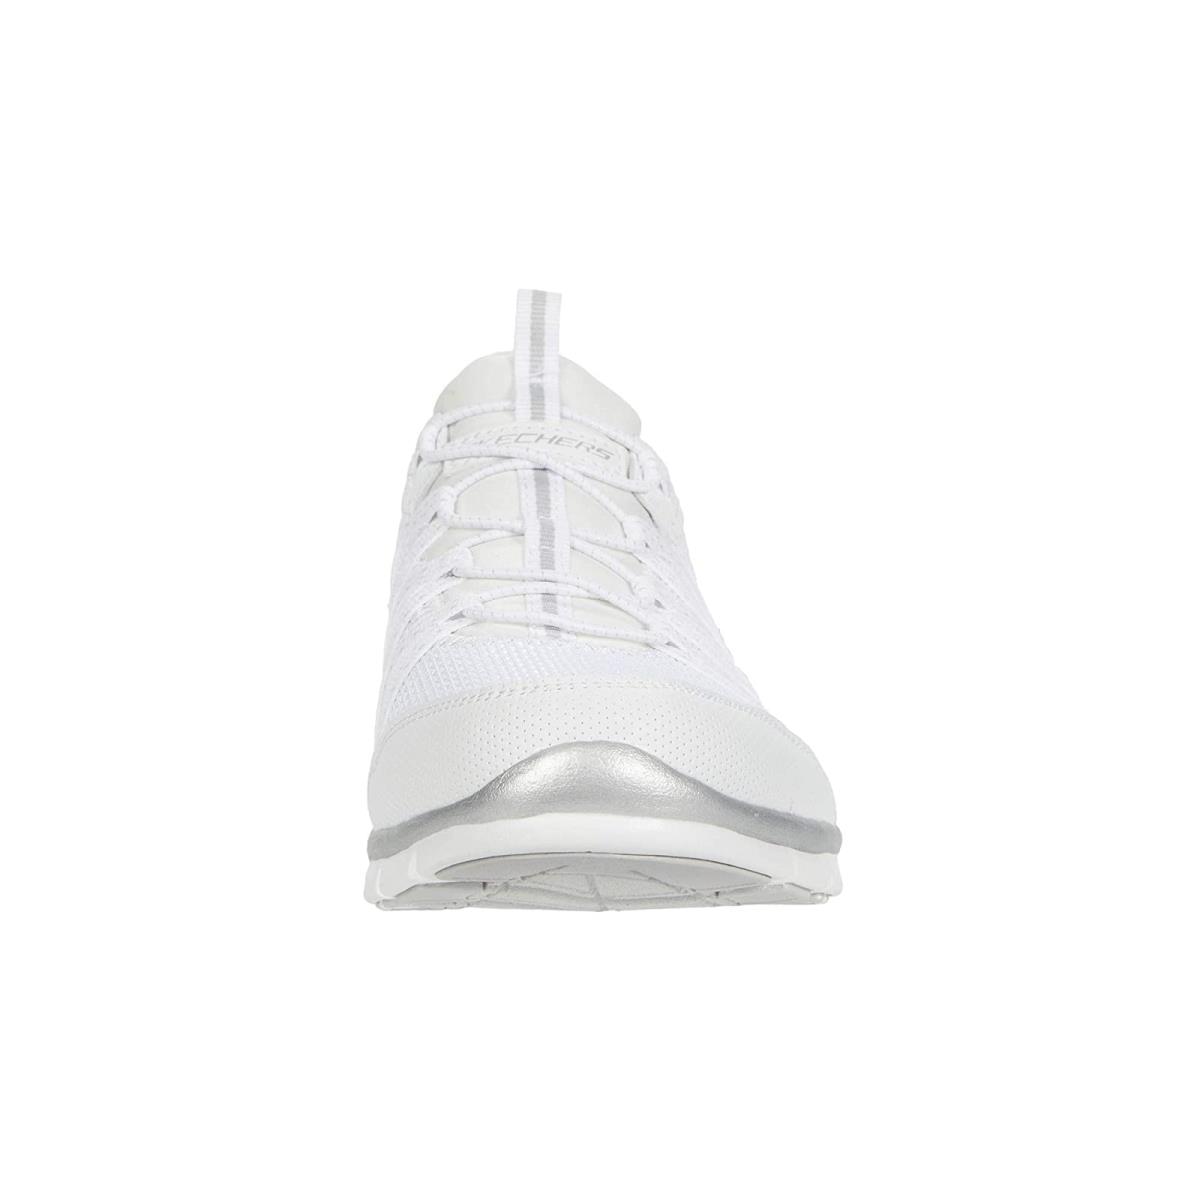 Skechers shoes  - White/Silver 4